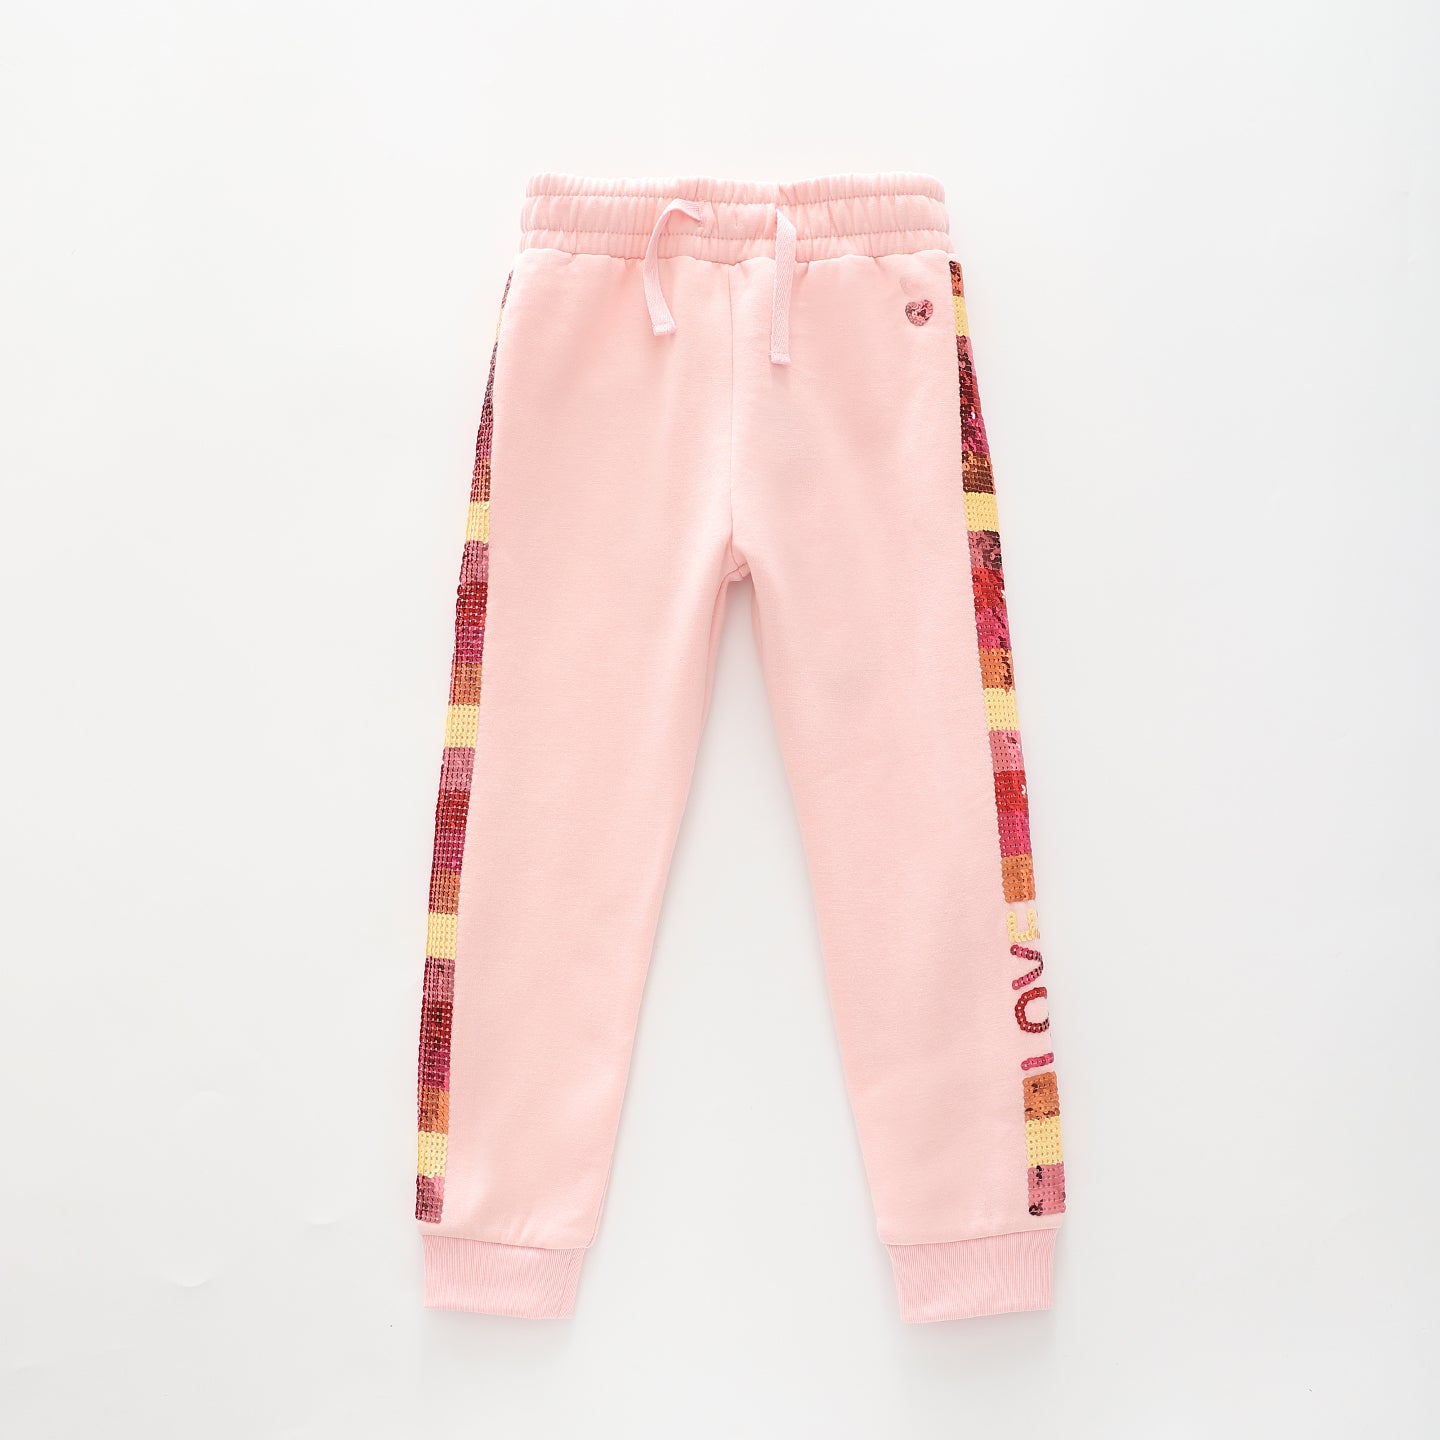 Over the Rainbow, Girls Pink Track Pants